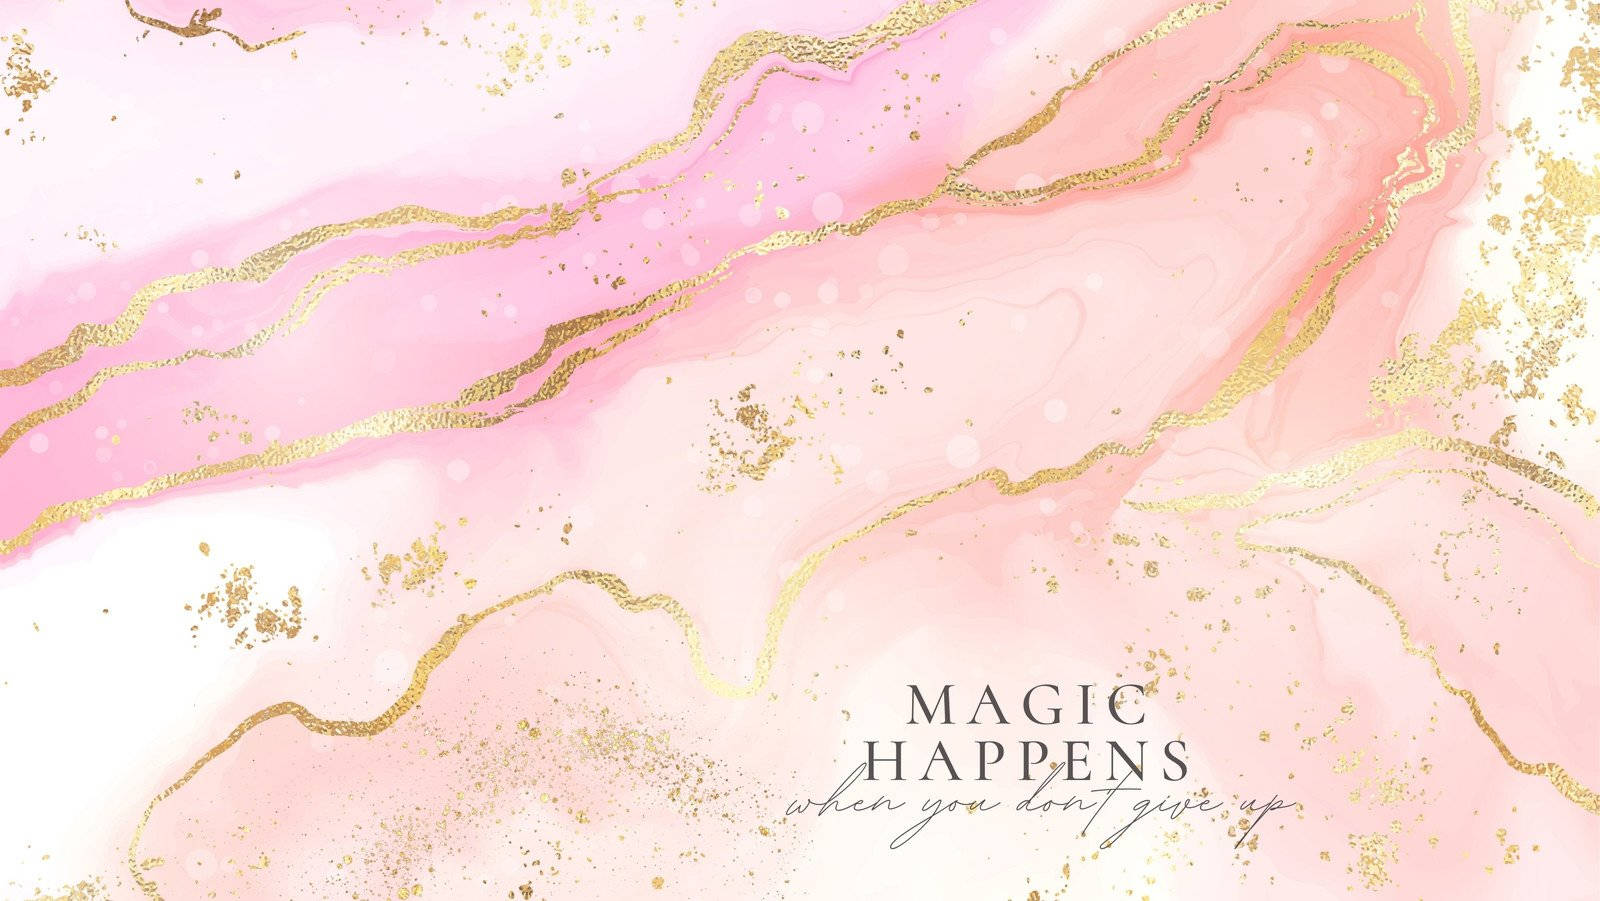 Caption: Sophisticated Pink&Gold Marble Texture Wallpaper